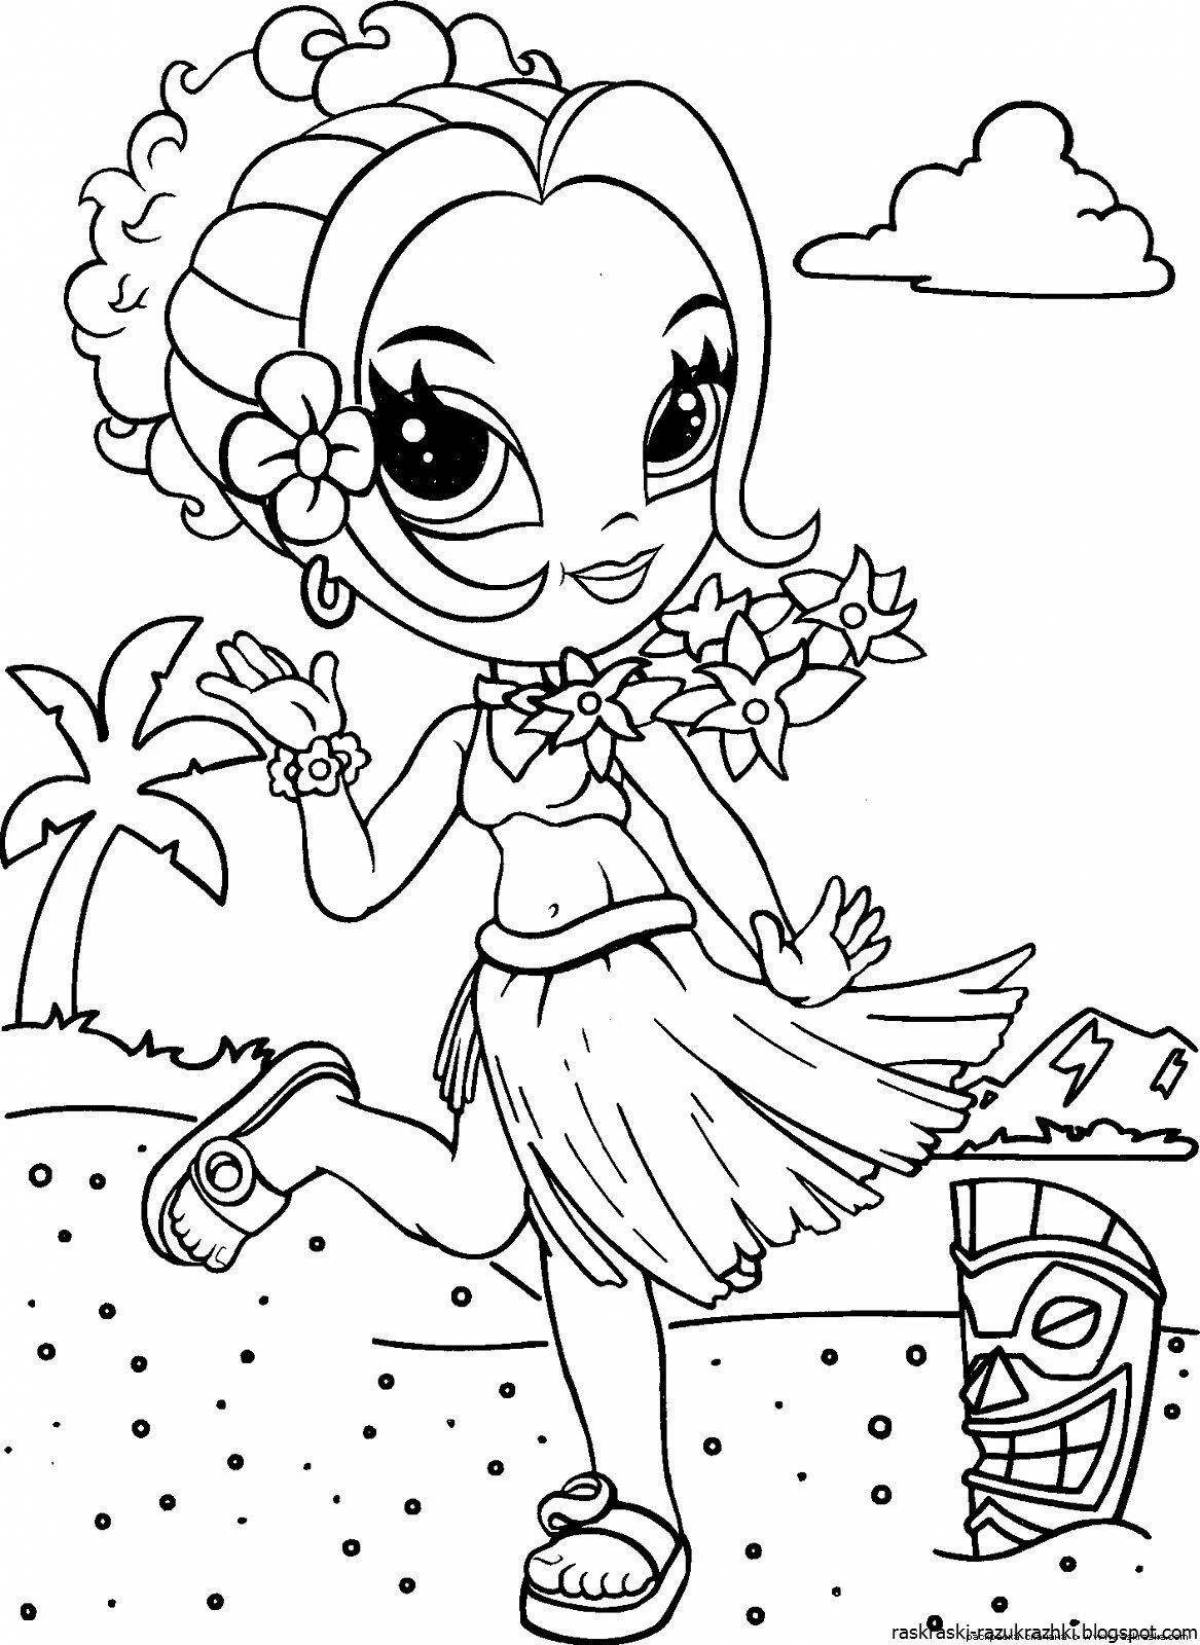 Sweet coloring for girls 5-6 years old